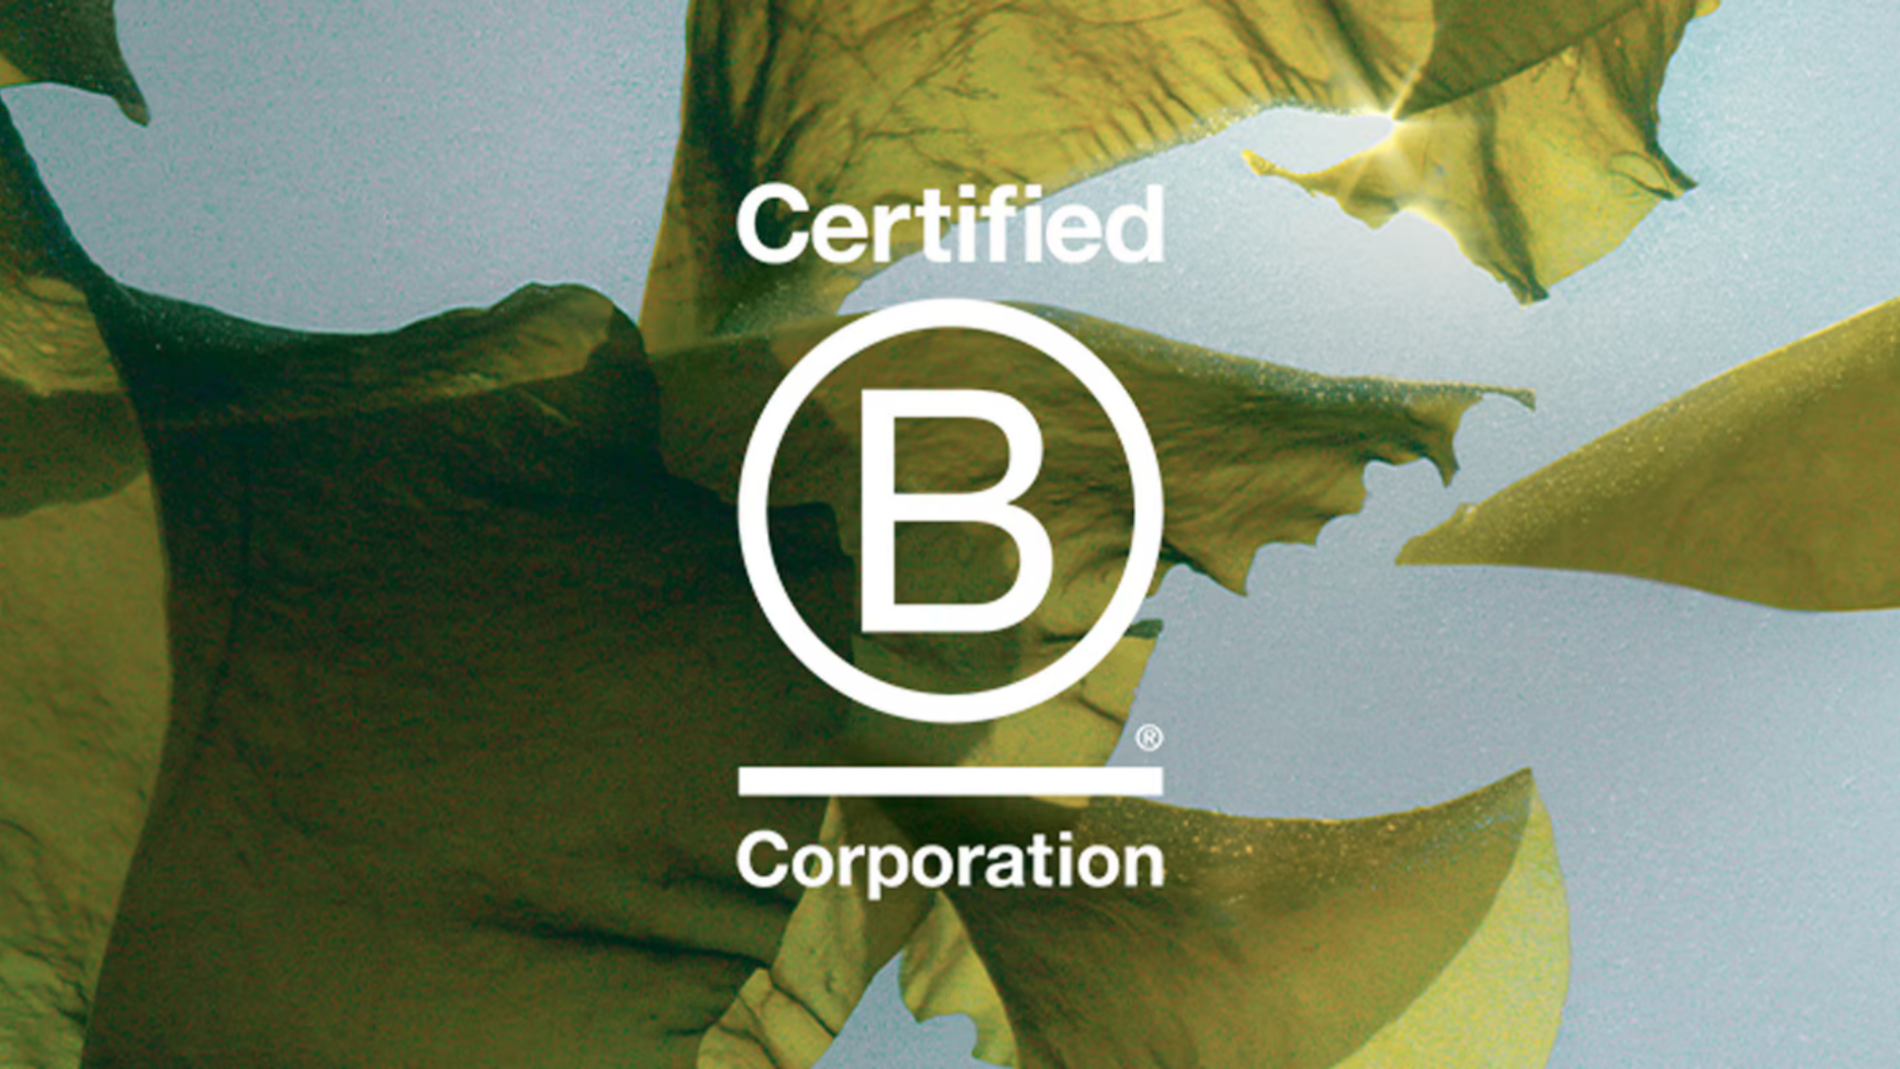 Certified B Corporation logo displayed prominently on a background with blue sky and tropical leaves.